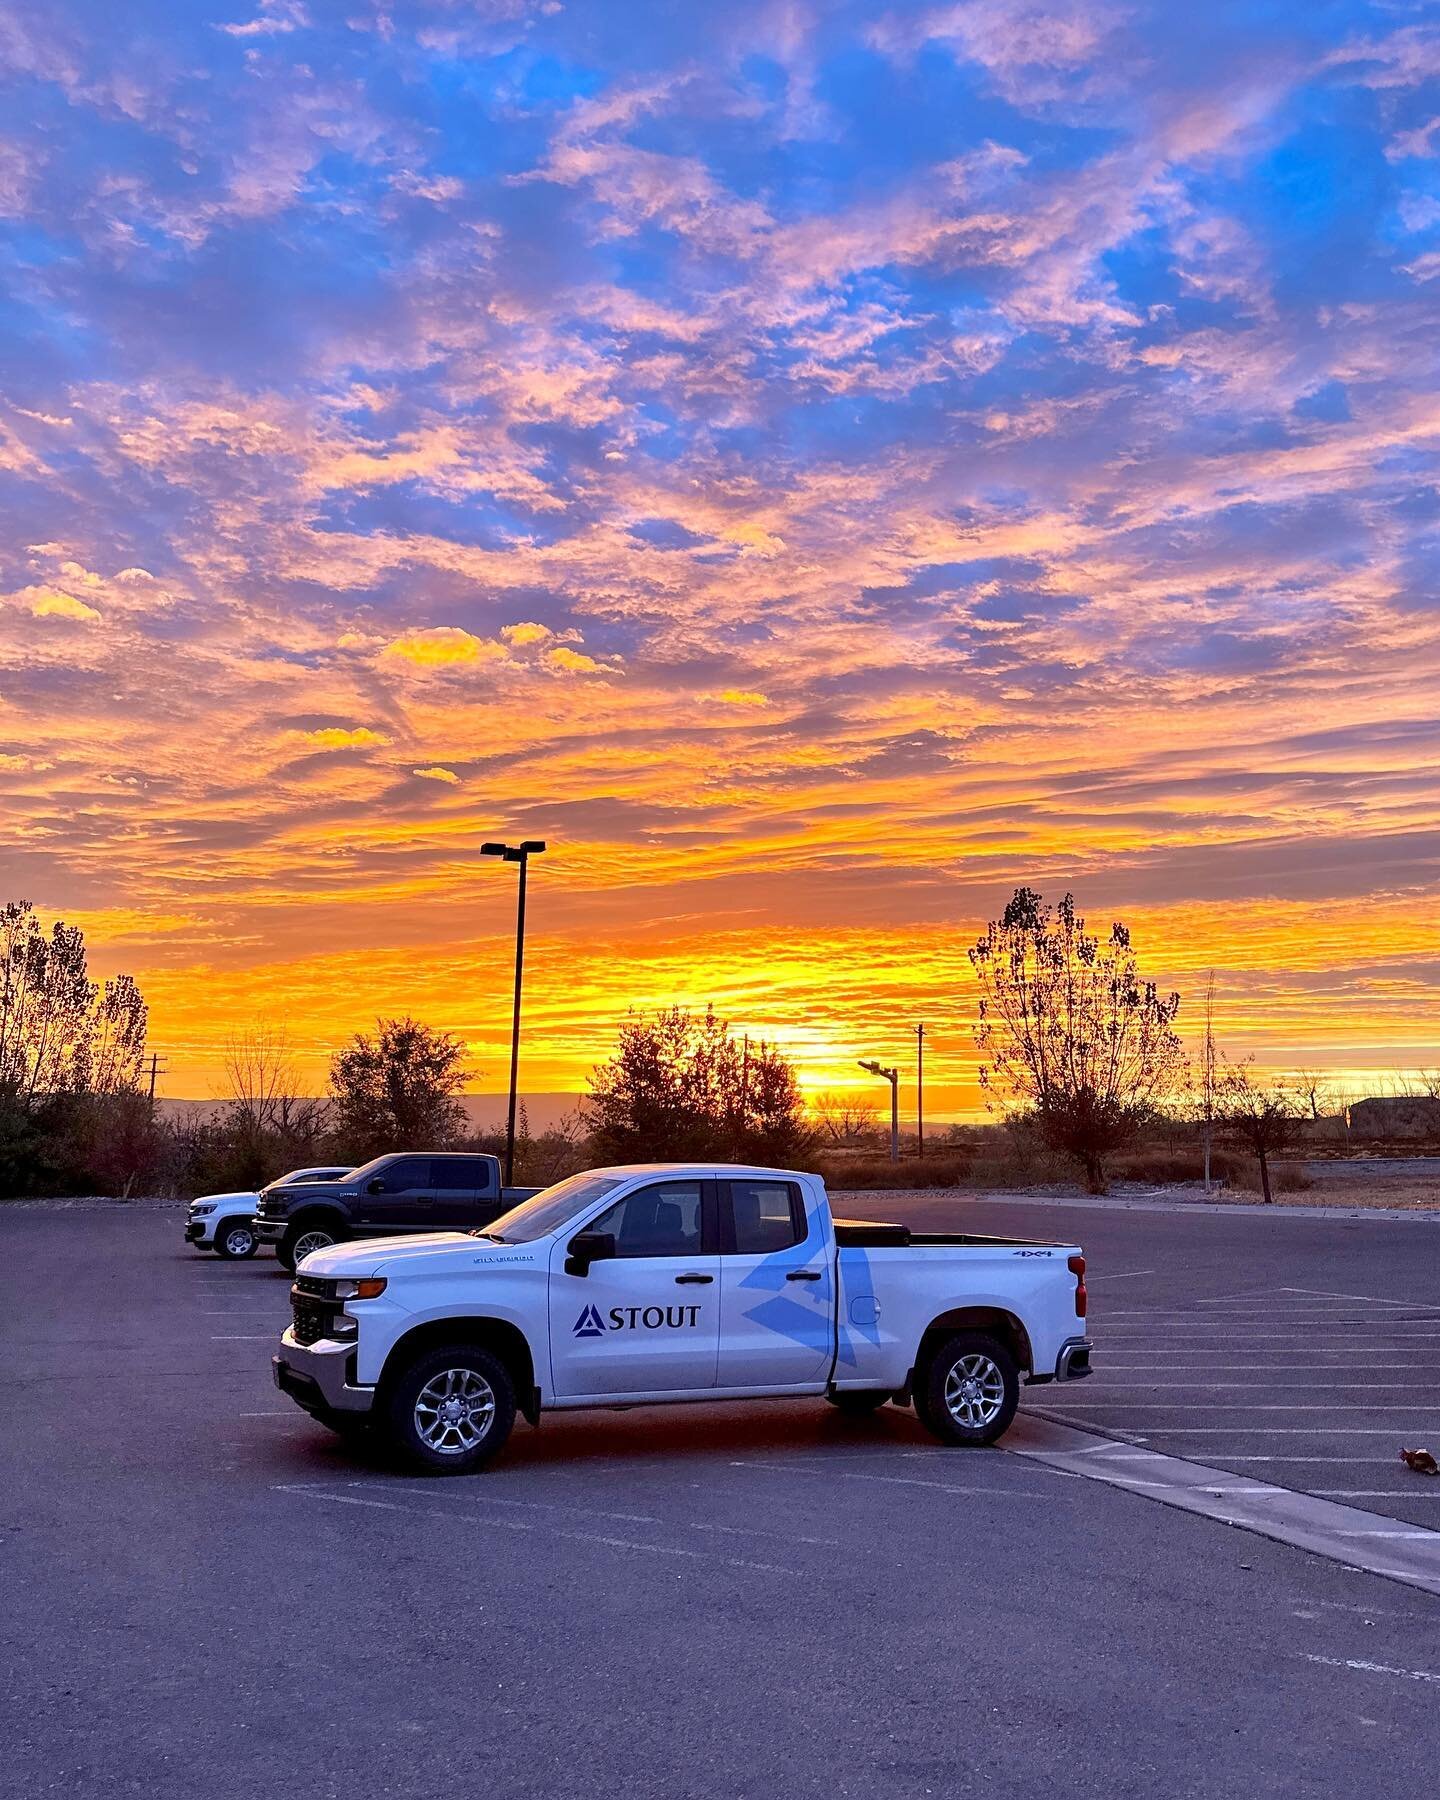 This sunrise 😍 Working outside everyday has its perks.
.
.
.
.
.
.
.
#sunrise #stout #construction #earlybird #underconstruction #project #groundbreaking #tractor #officeview #workhardplayhard #safetyfirst #hardhat